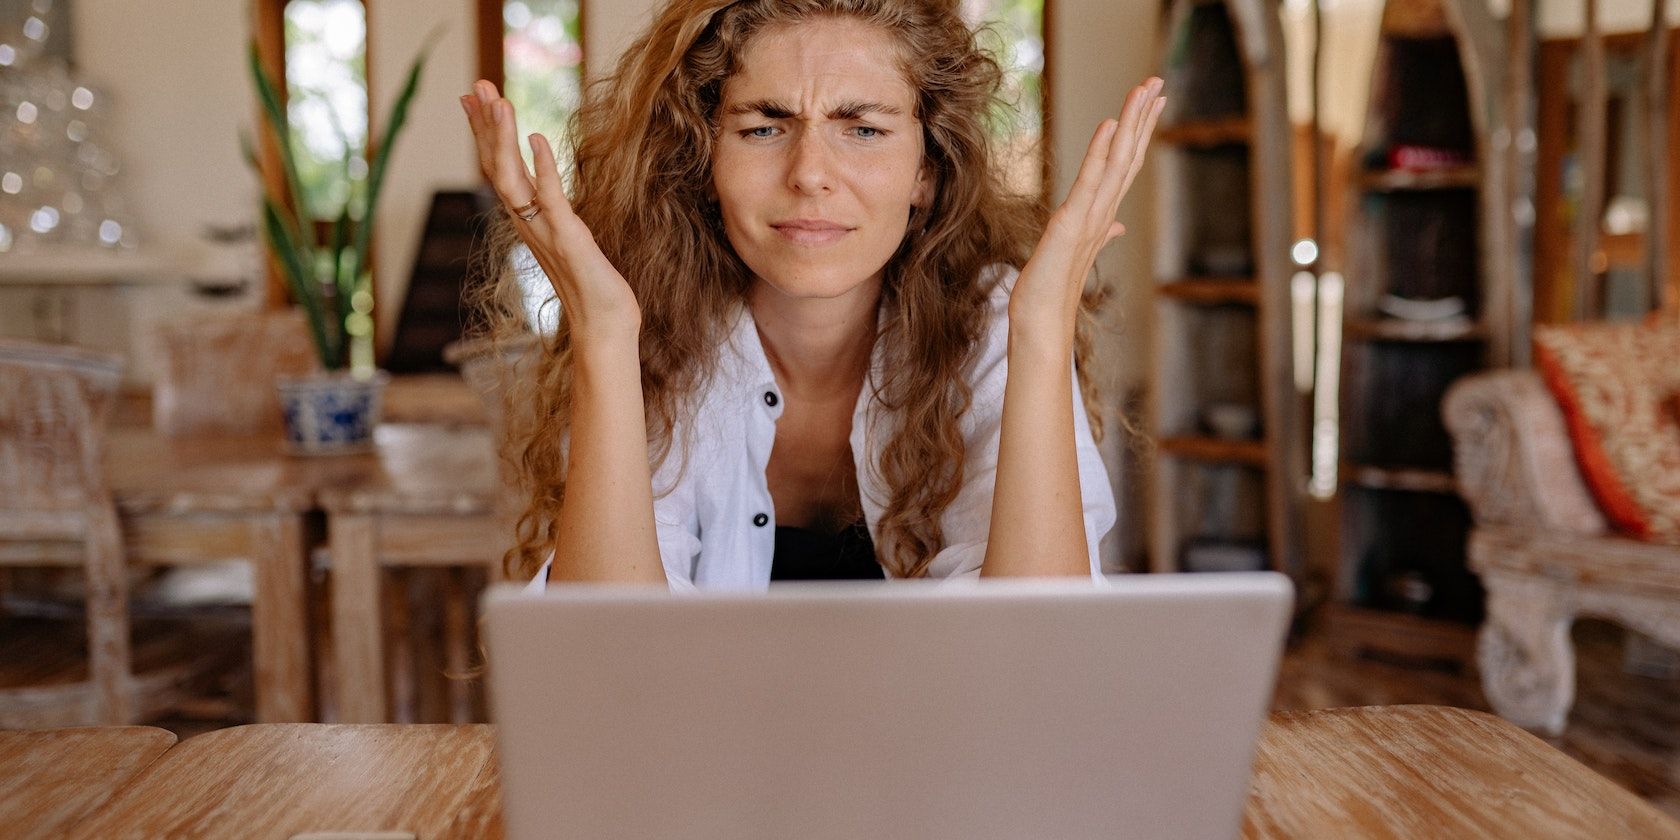 woman showing frustration on her face while using laptop